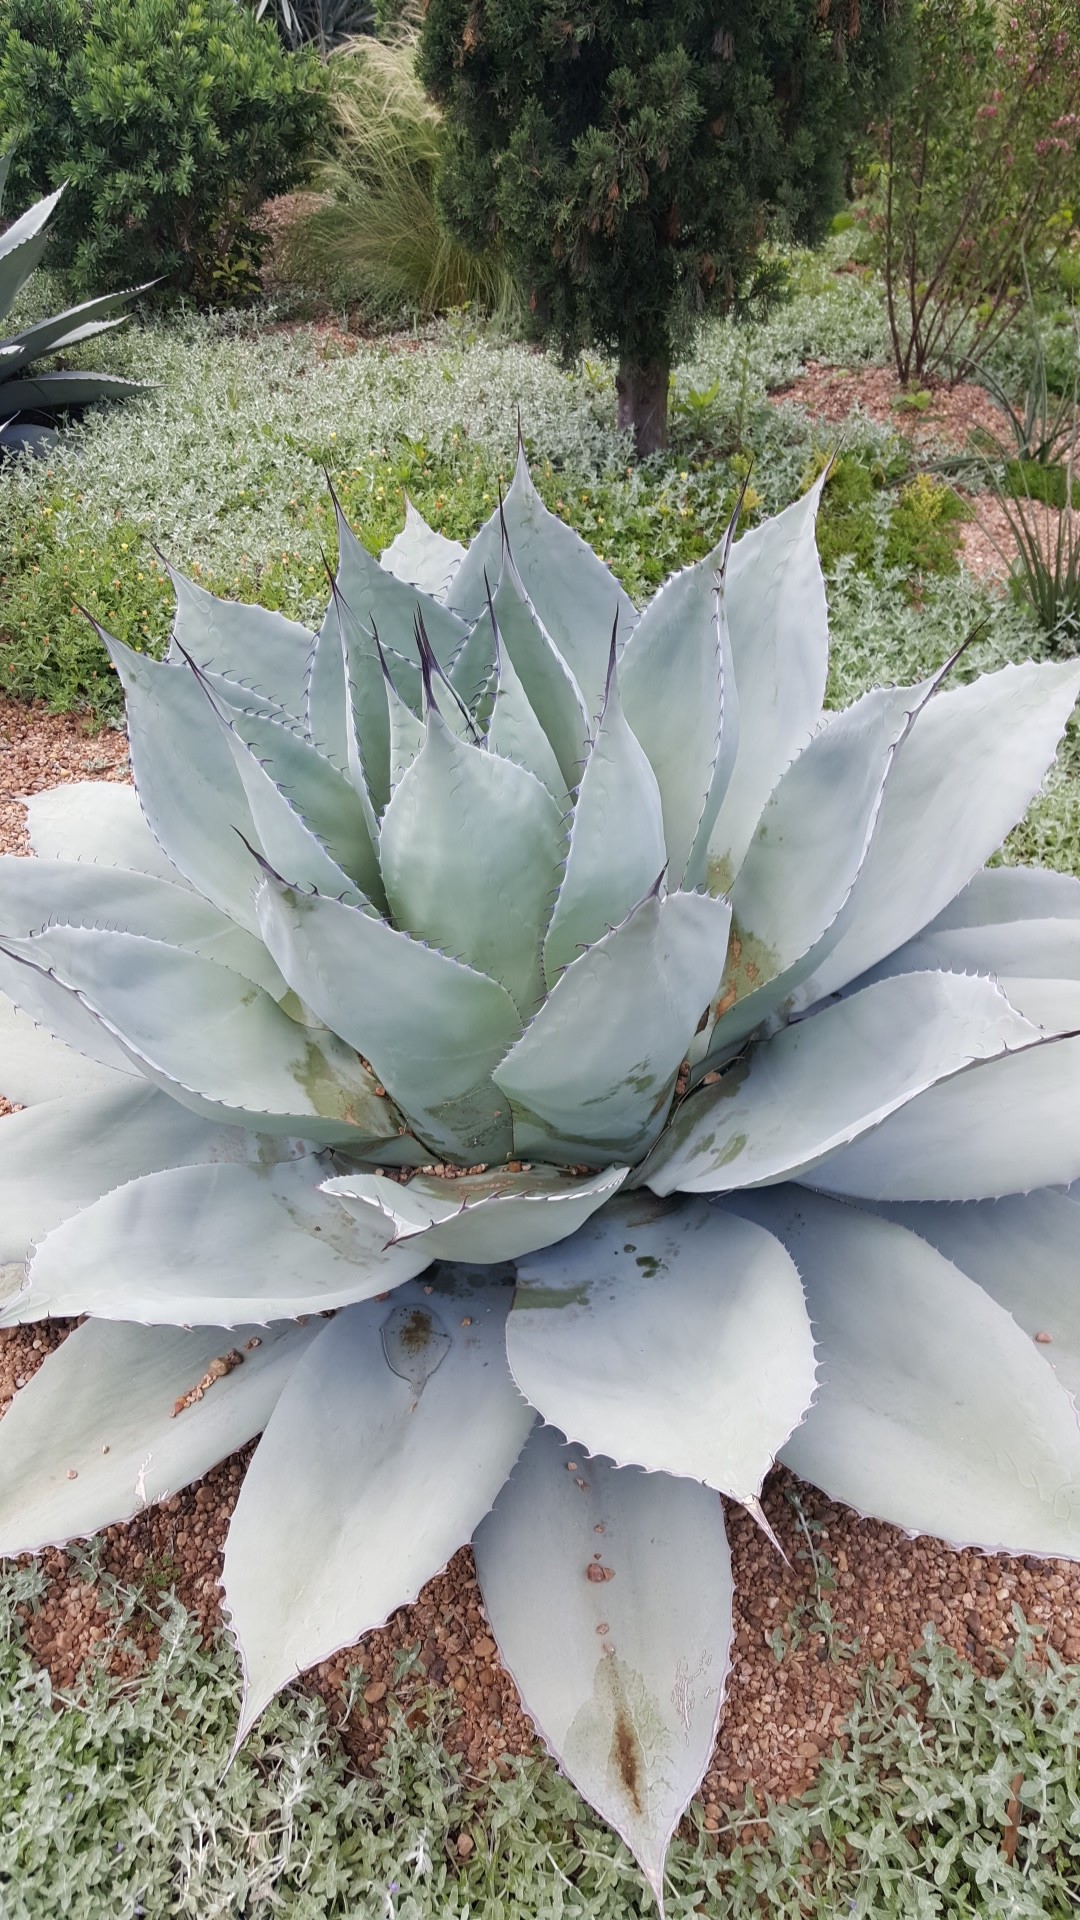 Whale's tongue agave 'Frosty Blue' (Agave ovatifolia 'Frosty Blue') Flower,  Leaf, Care, Uses - PictureThis